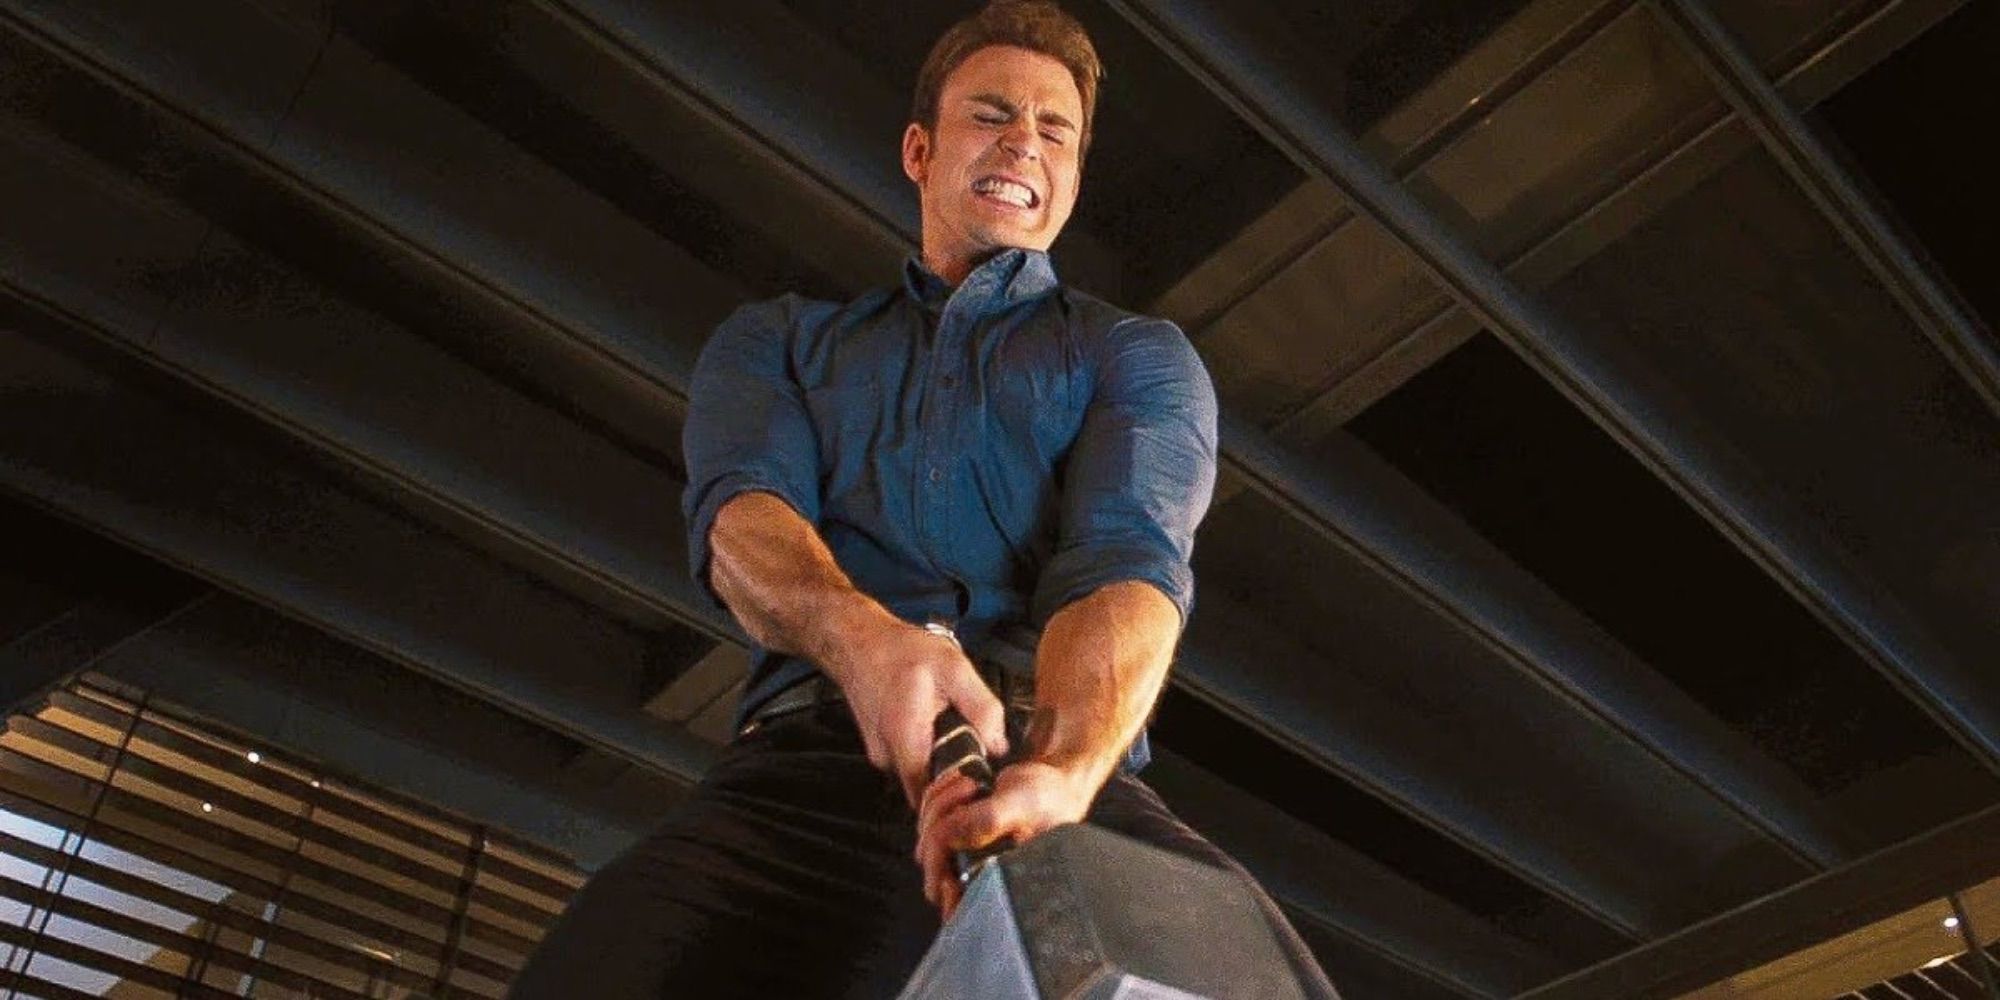 Steve Rogers tries to lift Mjolnir in Avengers: Age of Ultron